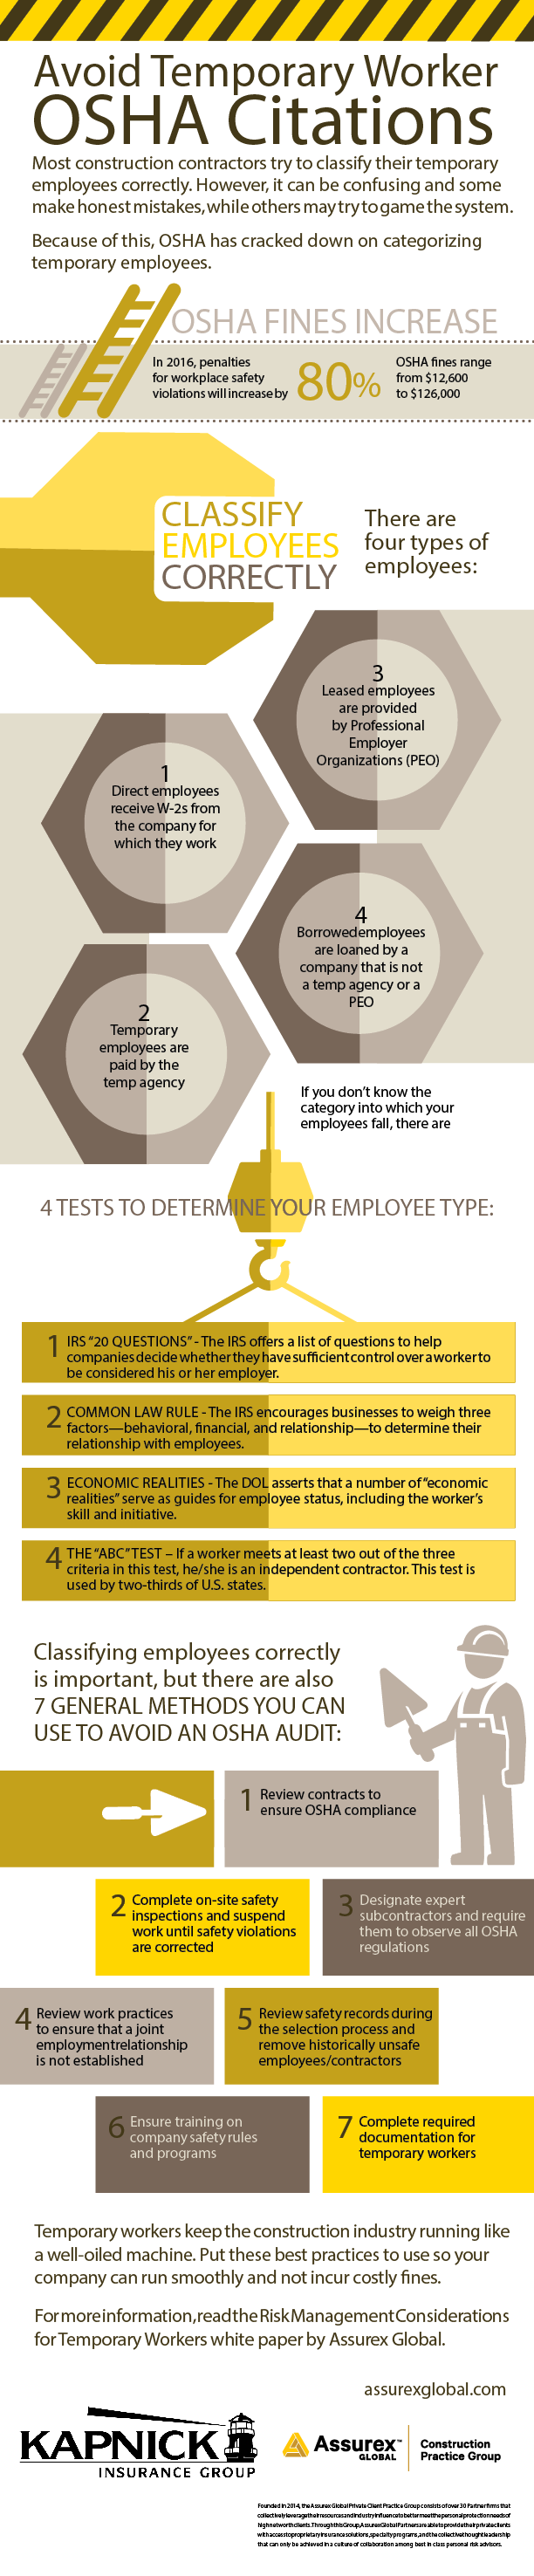 16_3_31_CPG_Temp_Worker_Infographic_9.png